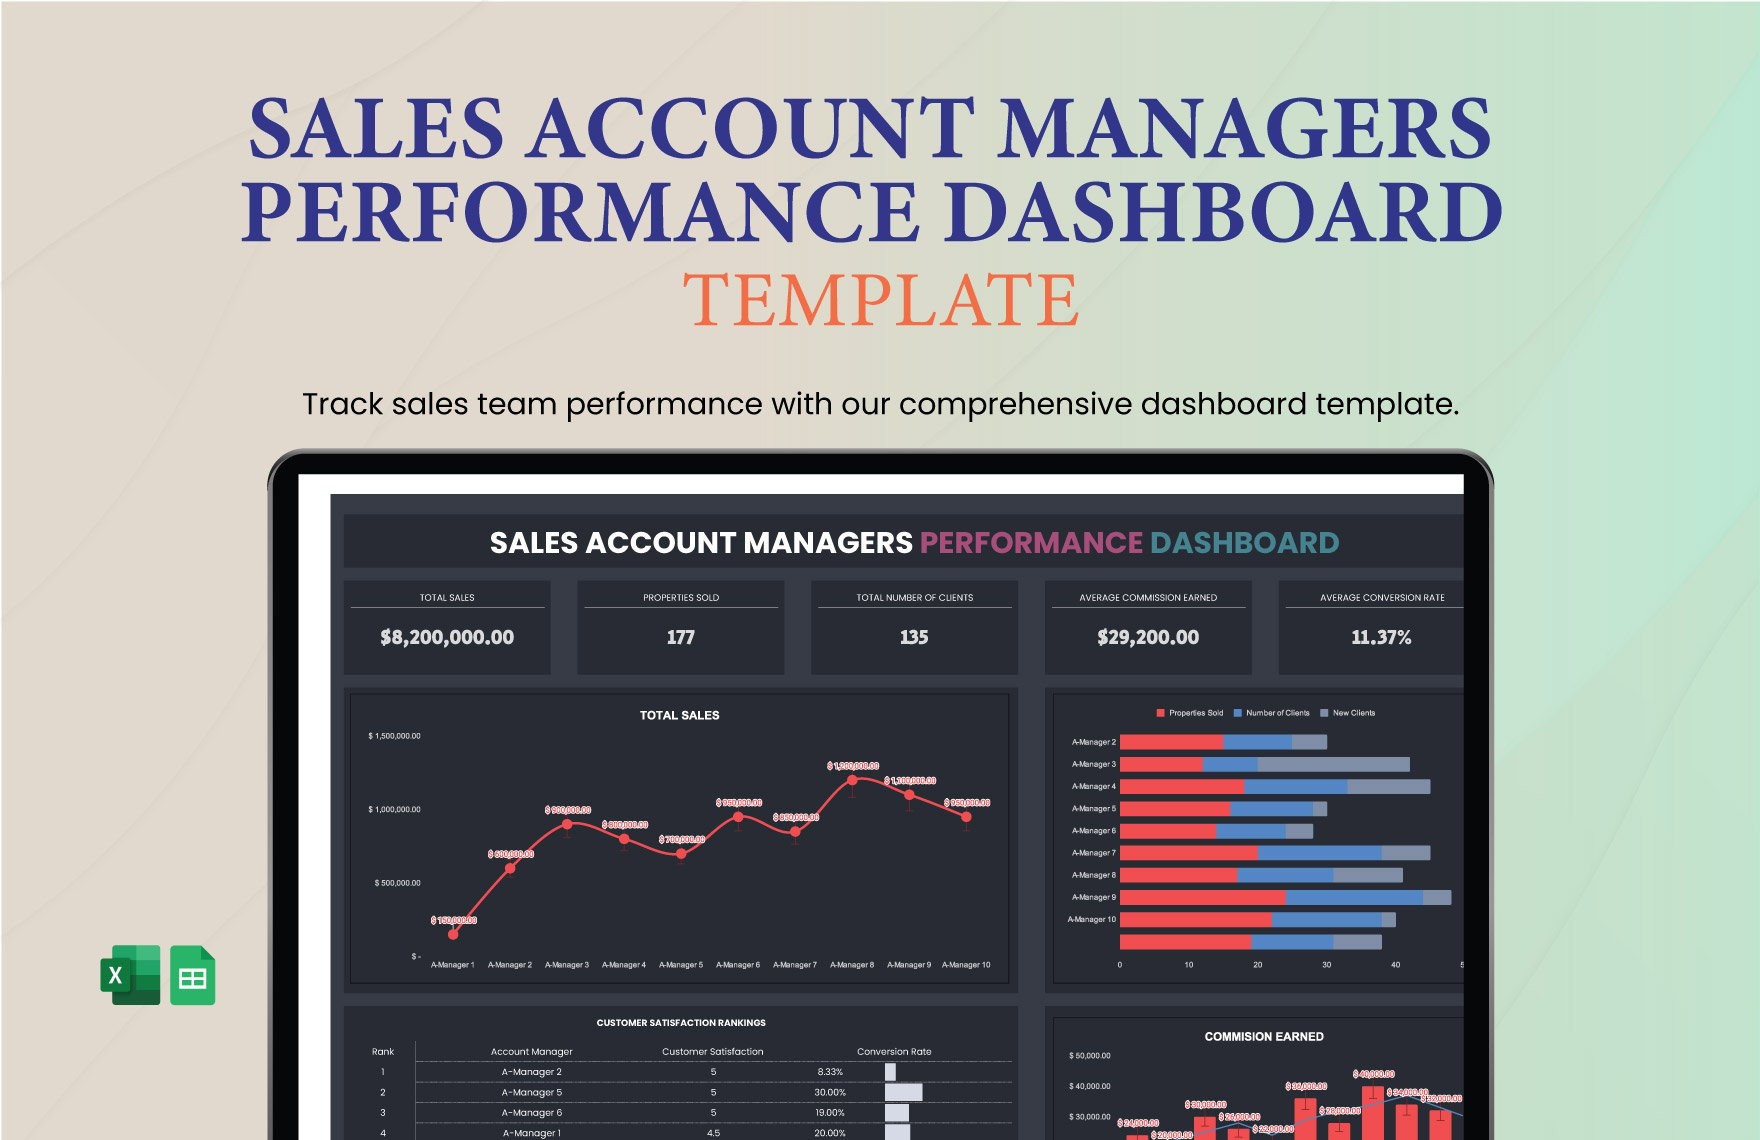 Sales Account Managers Performance Dashboard Template